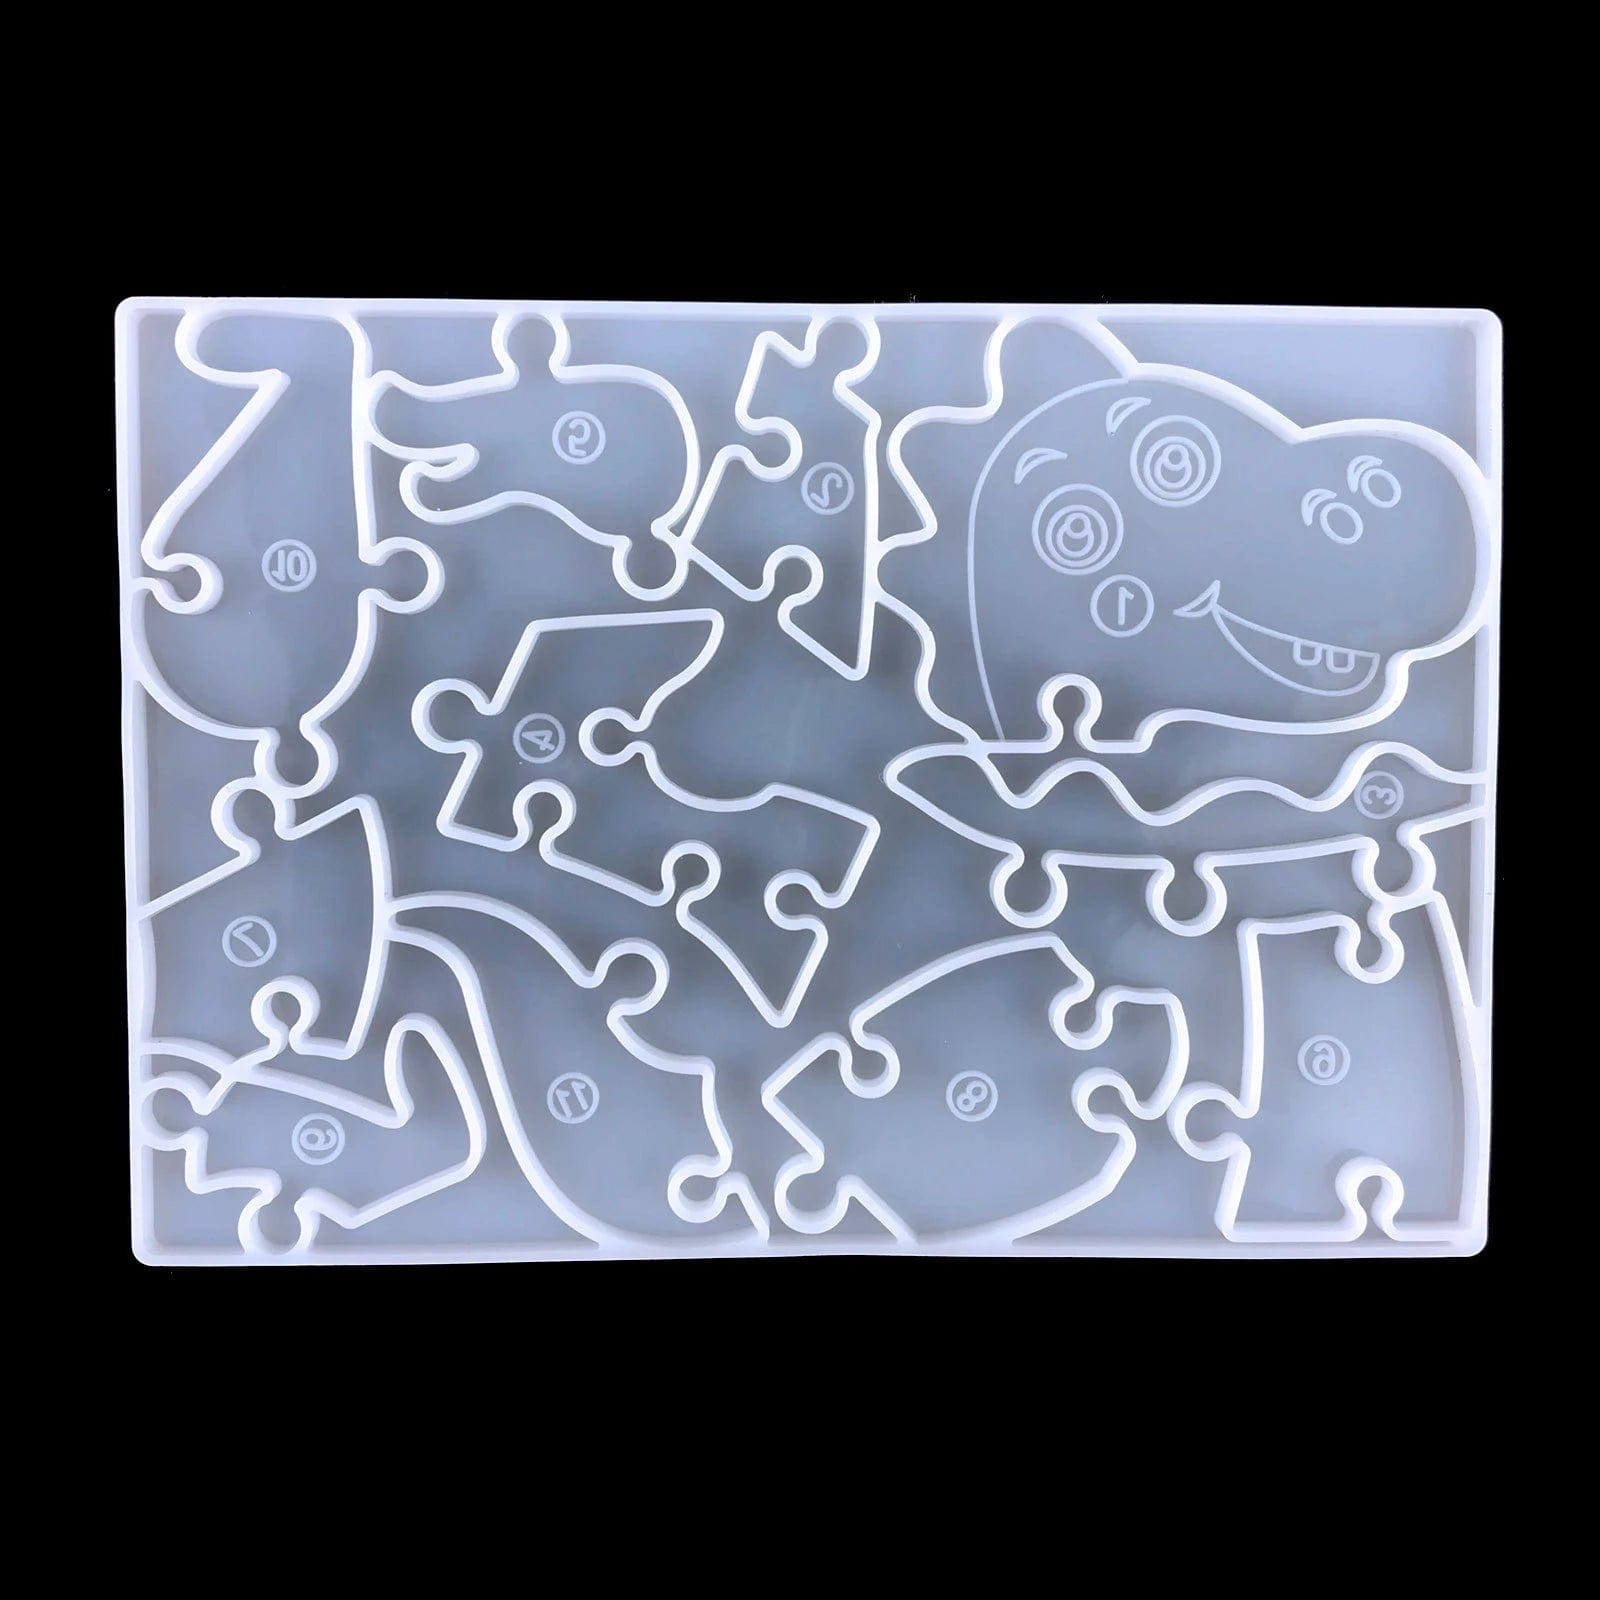 Craft Your Jurassic World: Dive into Creativity with our Silicone Epoxy Dinosaur Puzzle Molds